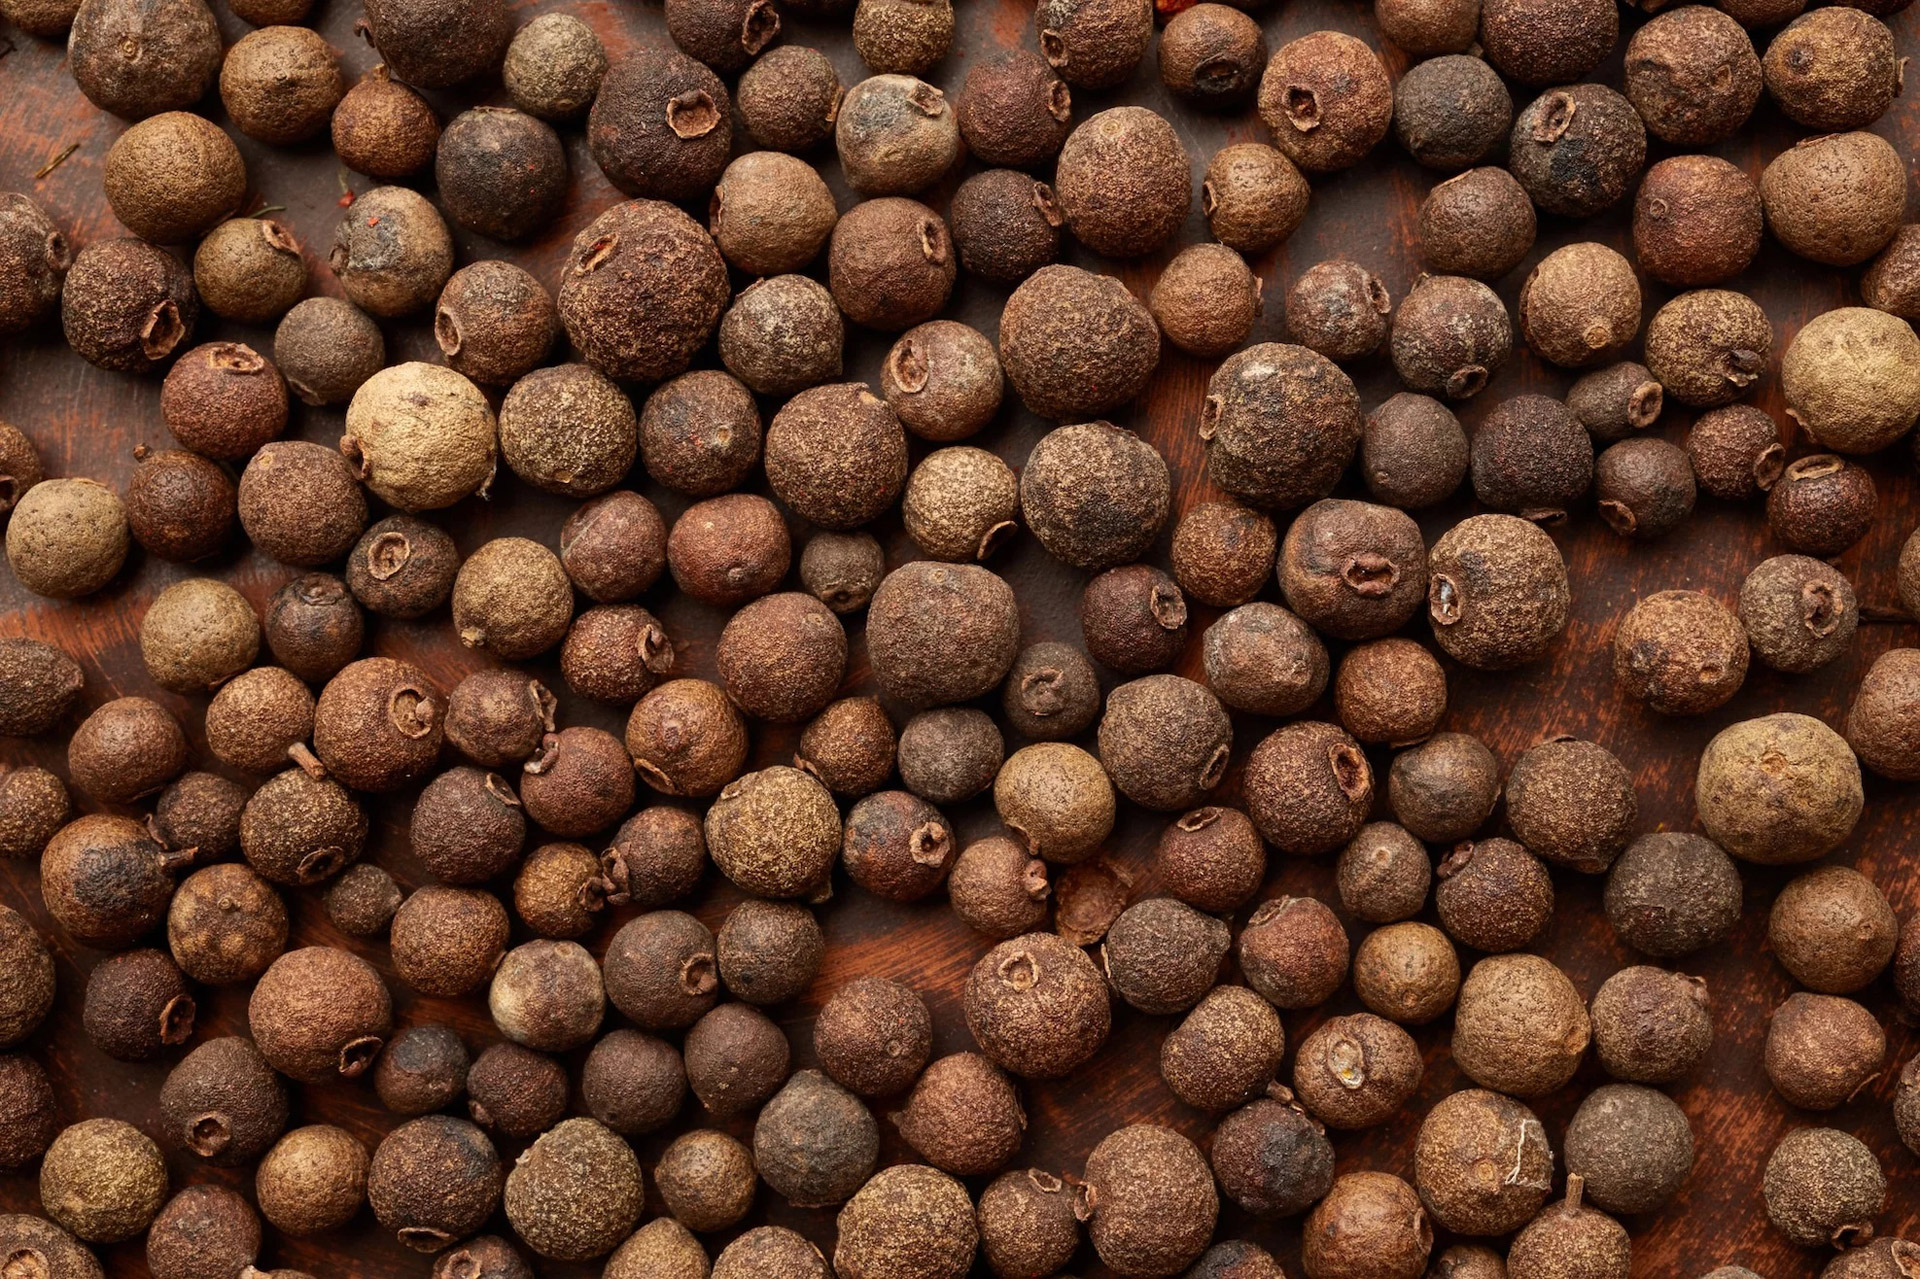 Pimento berries representing Allspice to show the Difference Between Mixed Spice and Allspice.